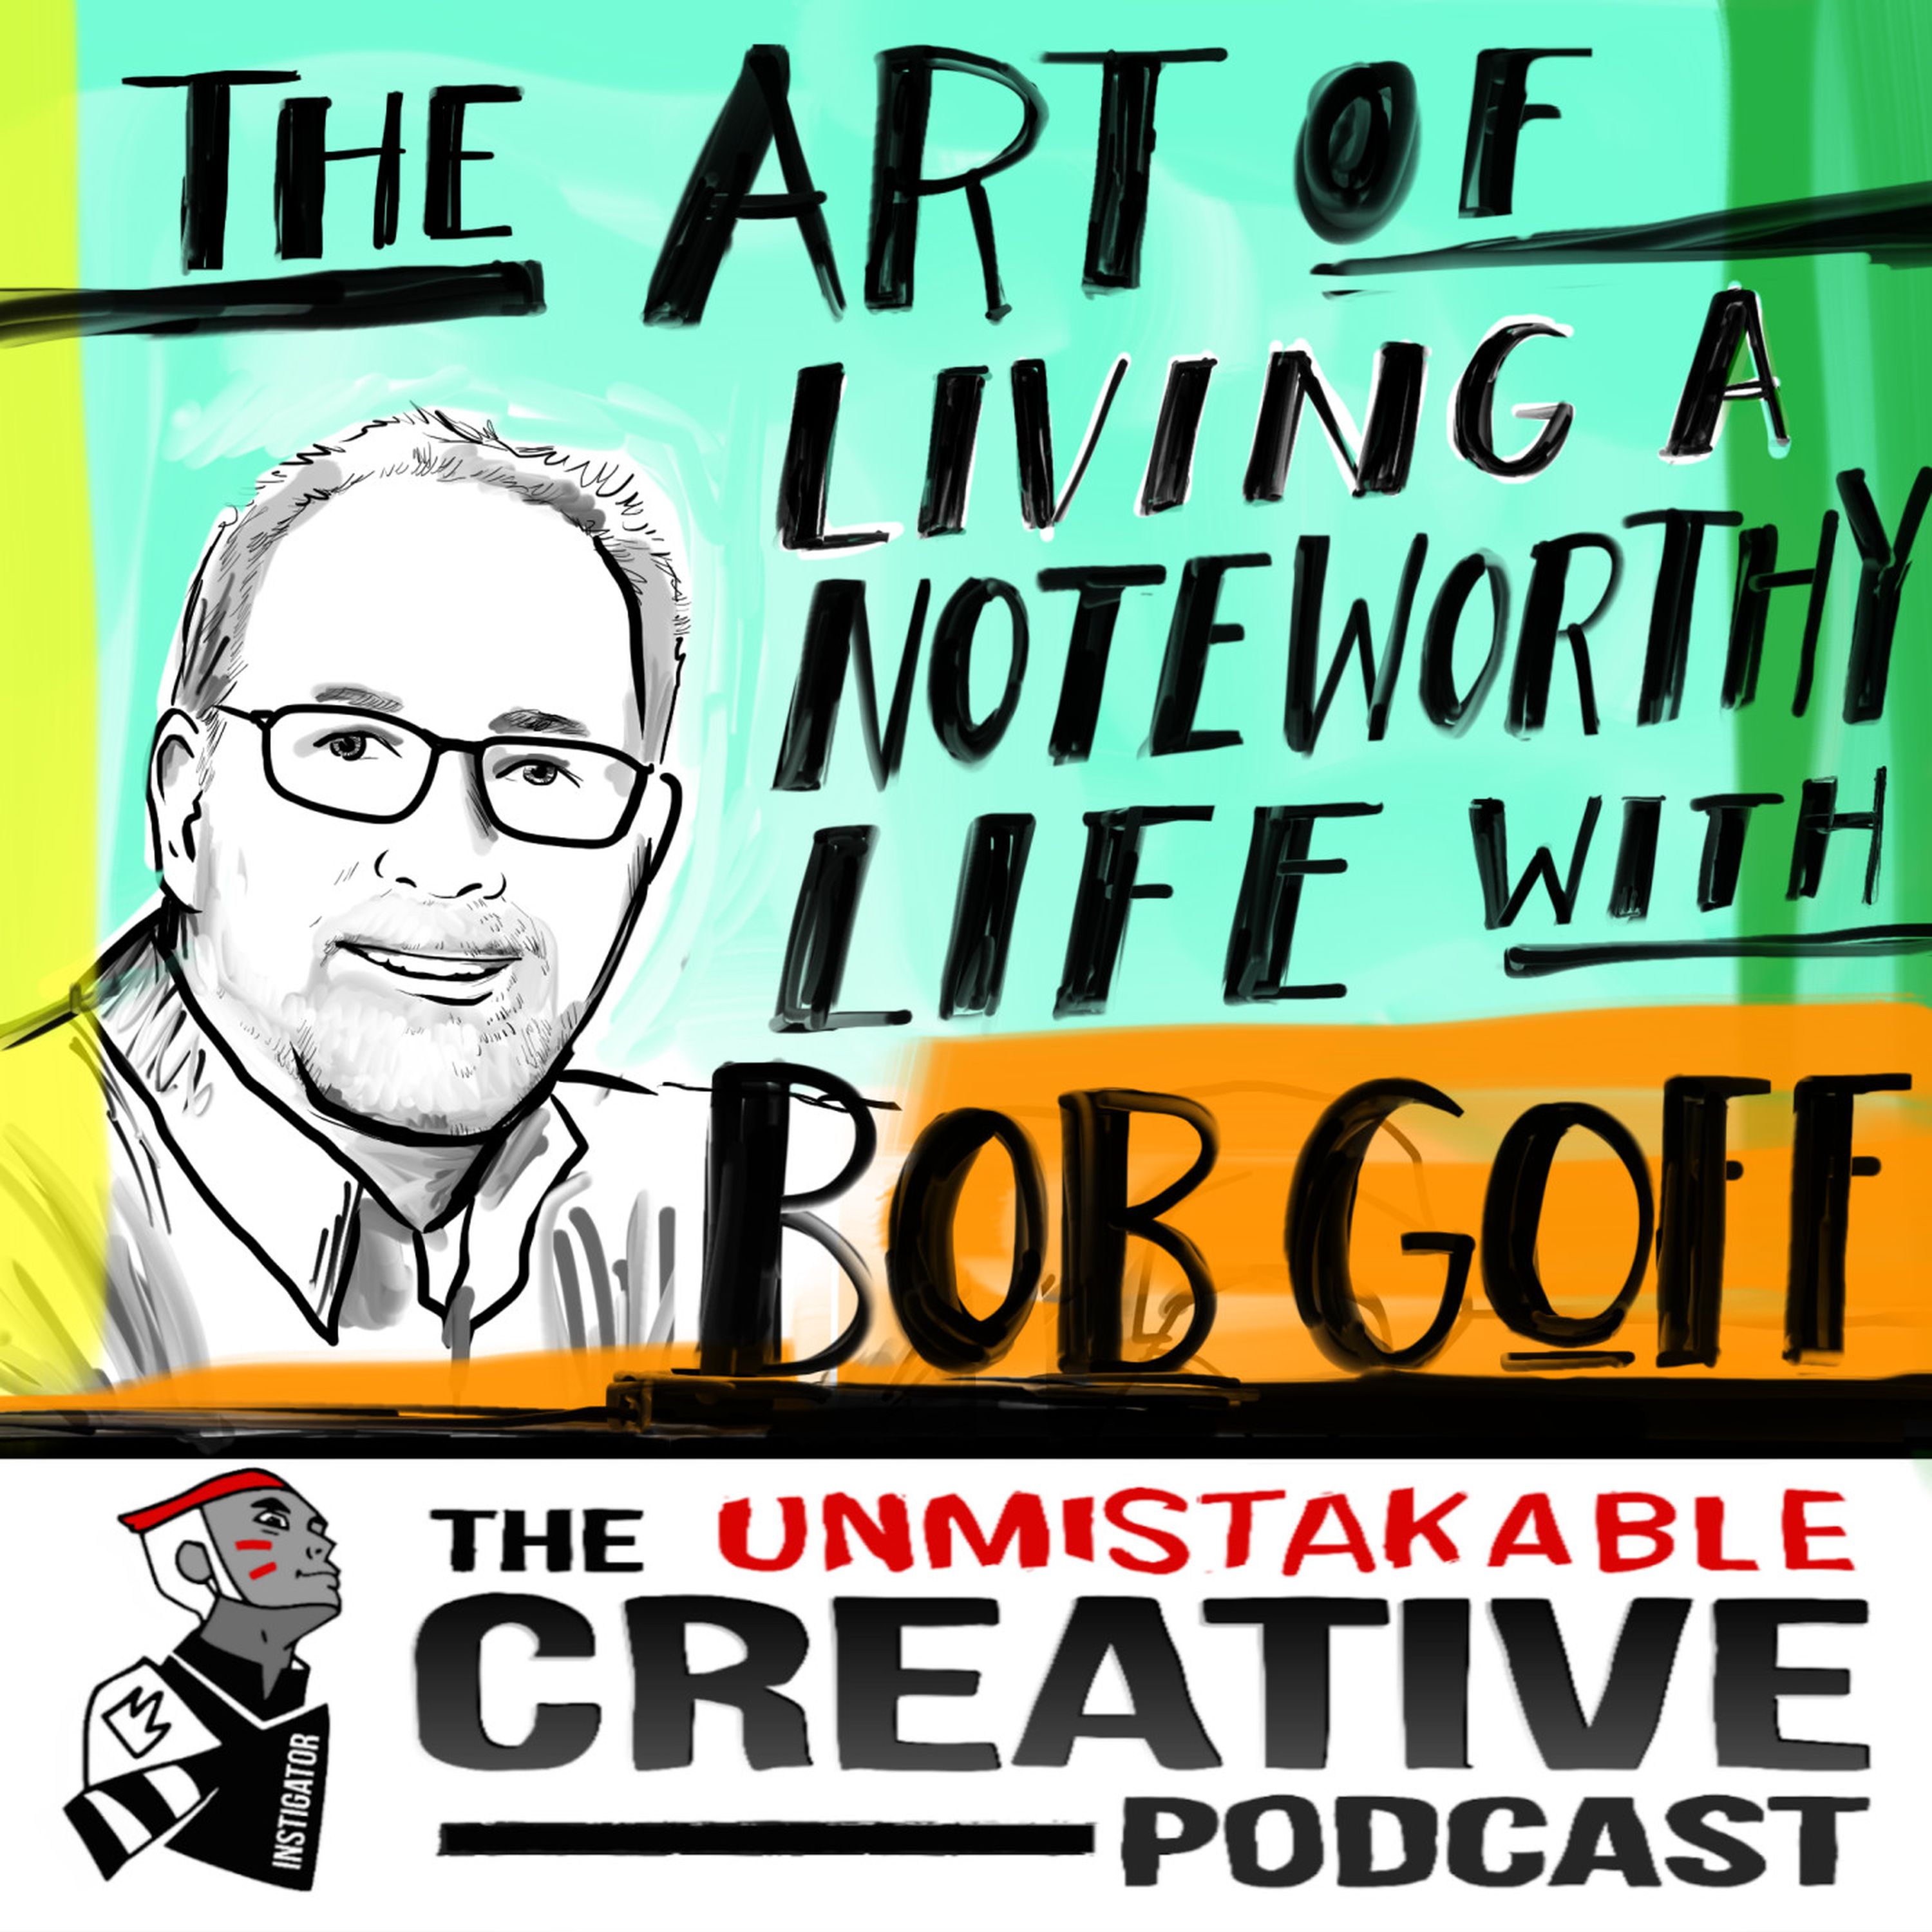 The Art of Living a Noteworthy Life with Bob Goff Image